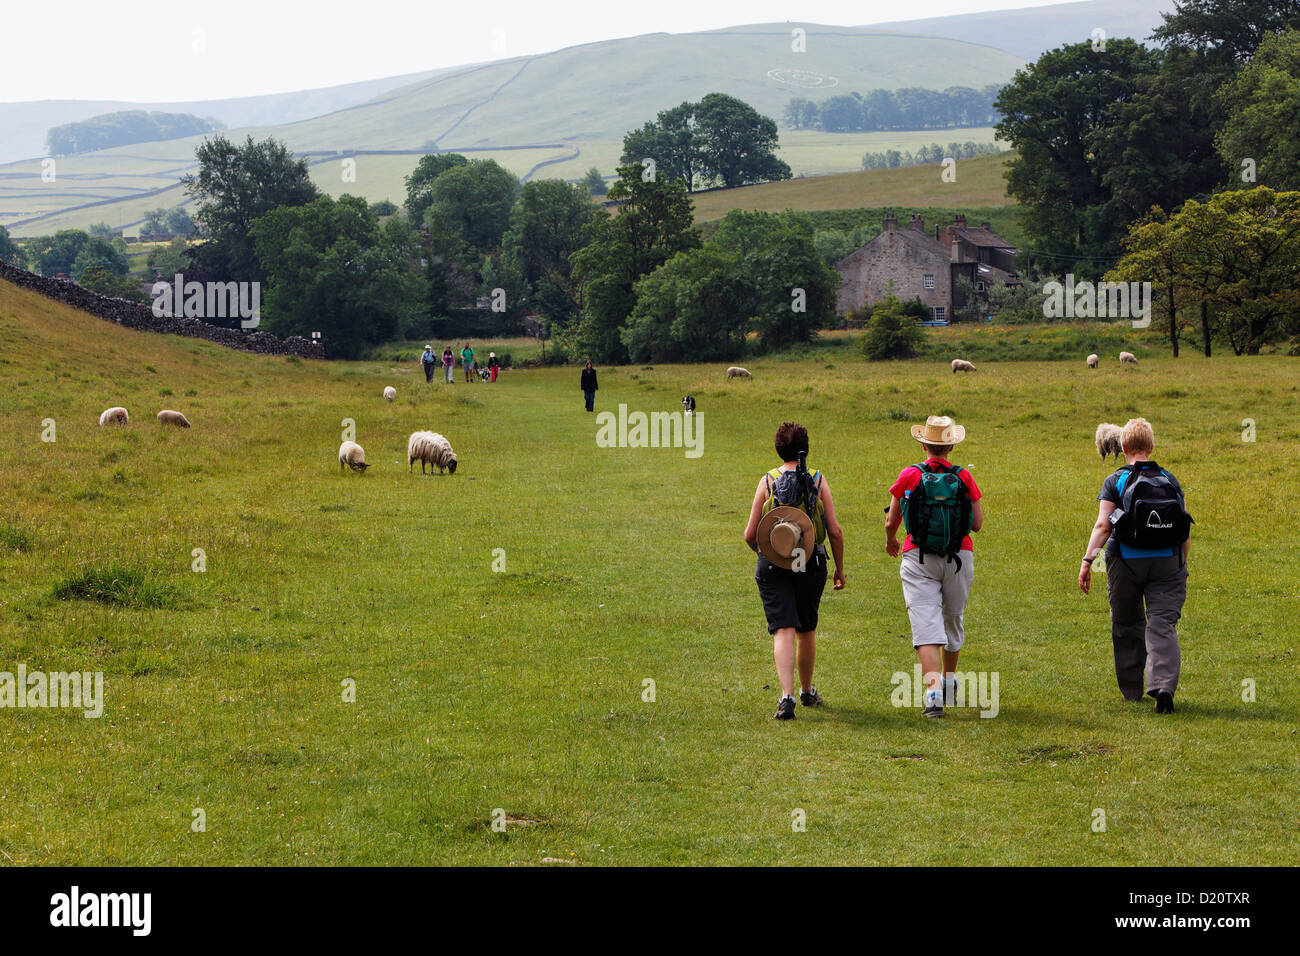 Hikers in Yorkshire Dales National Park, Yorkshire Dales, Yorkshire, England, Great Britain, Europe Stock Photo